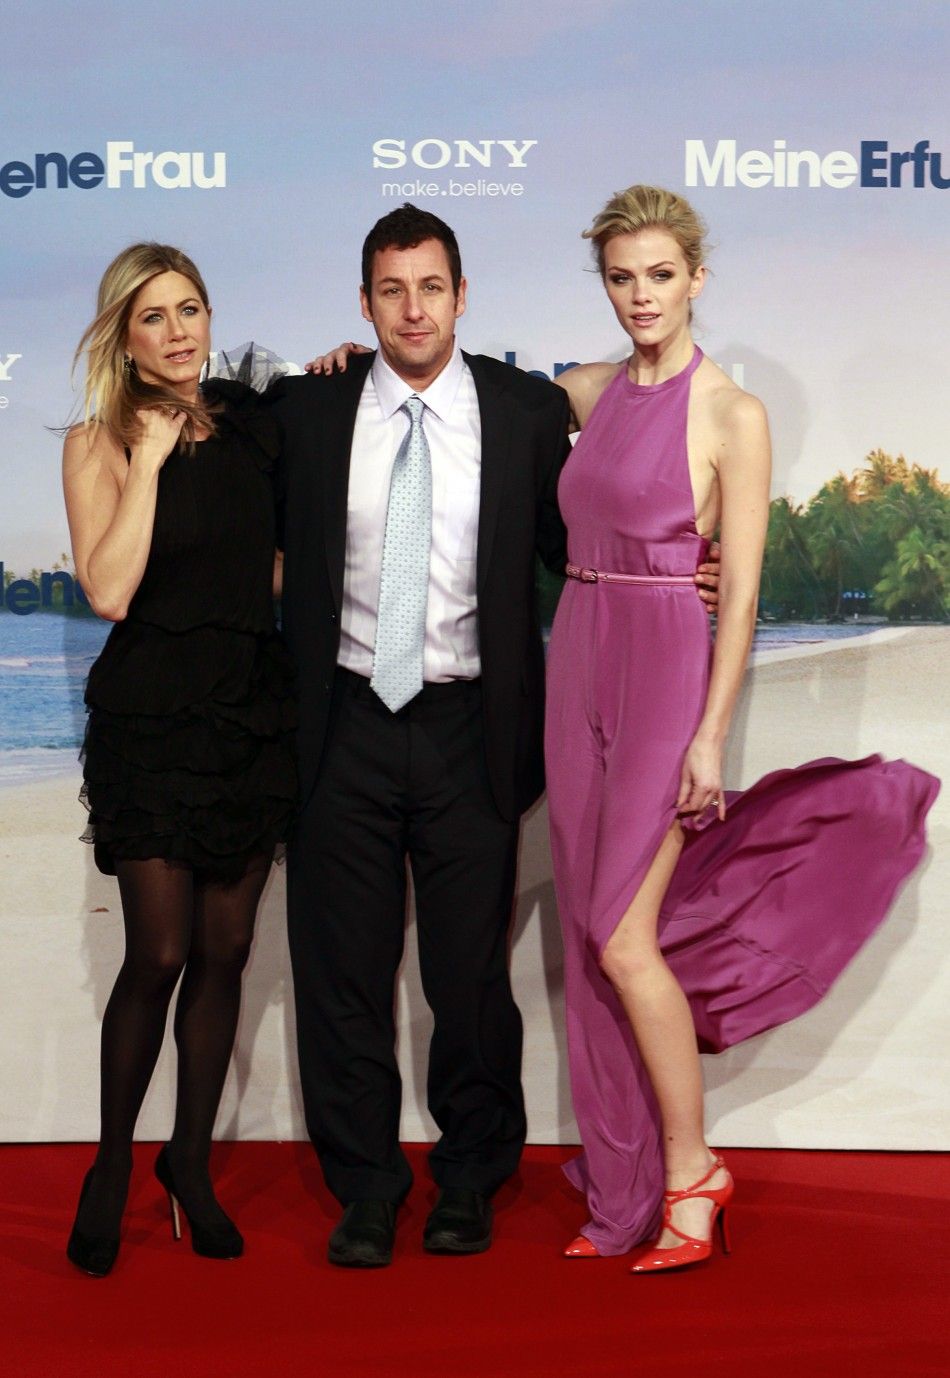 Aniston, Sandler and Decker pose on the red carpet as they arrive for the German premiere of the movie Just Go With It in Berlin February 21, 2011